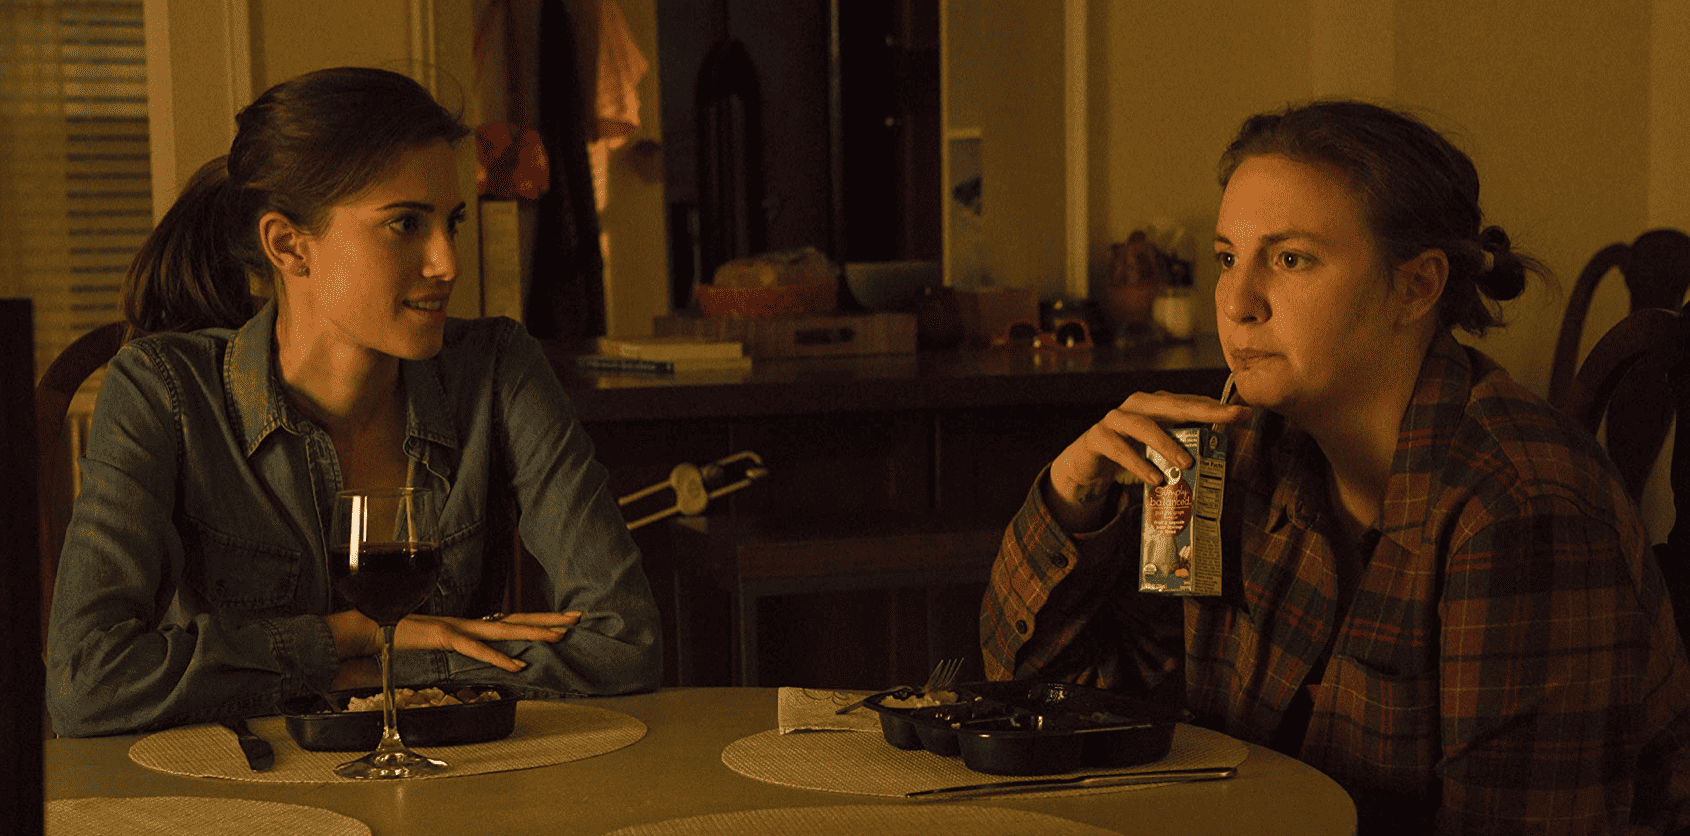 Marnie (Allison Williams) and Hannah (Lena Dunham) are having dinner together while drinking wine and a kids' juice box in this image from Apatow Productions